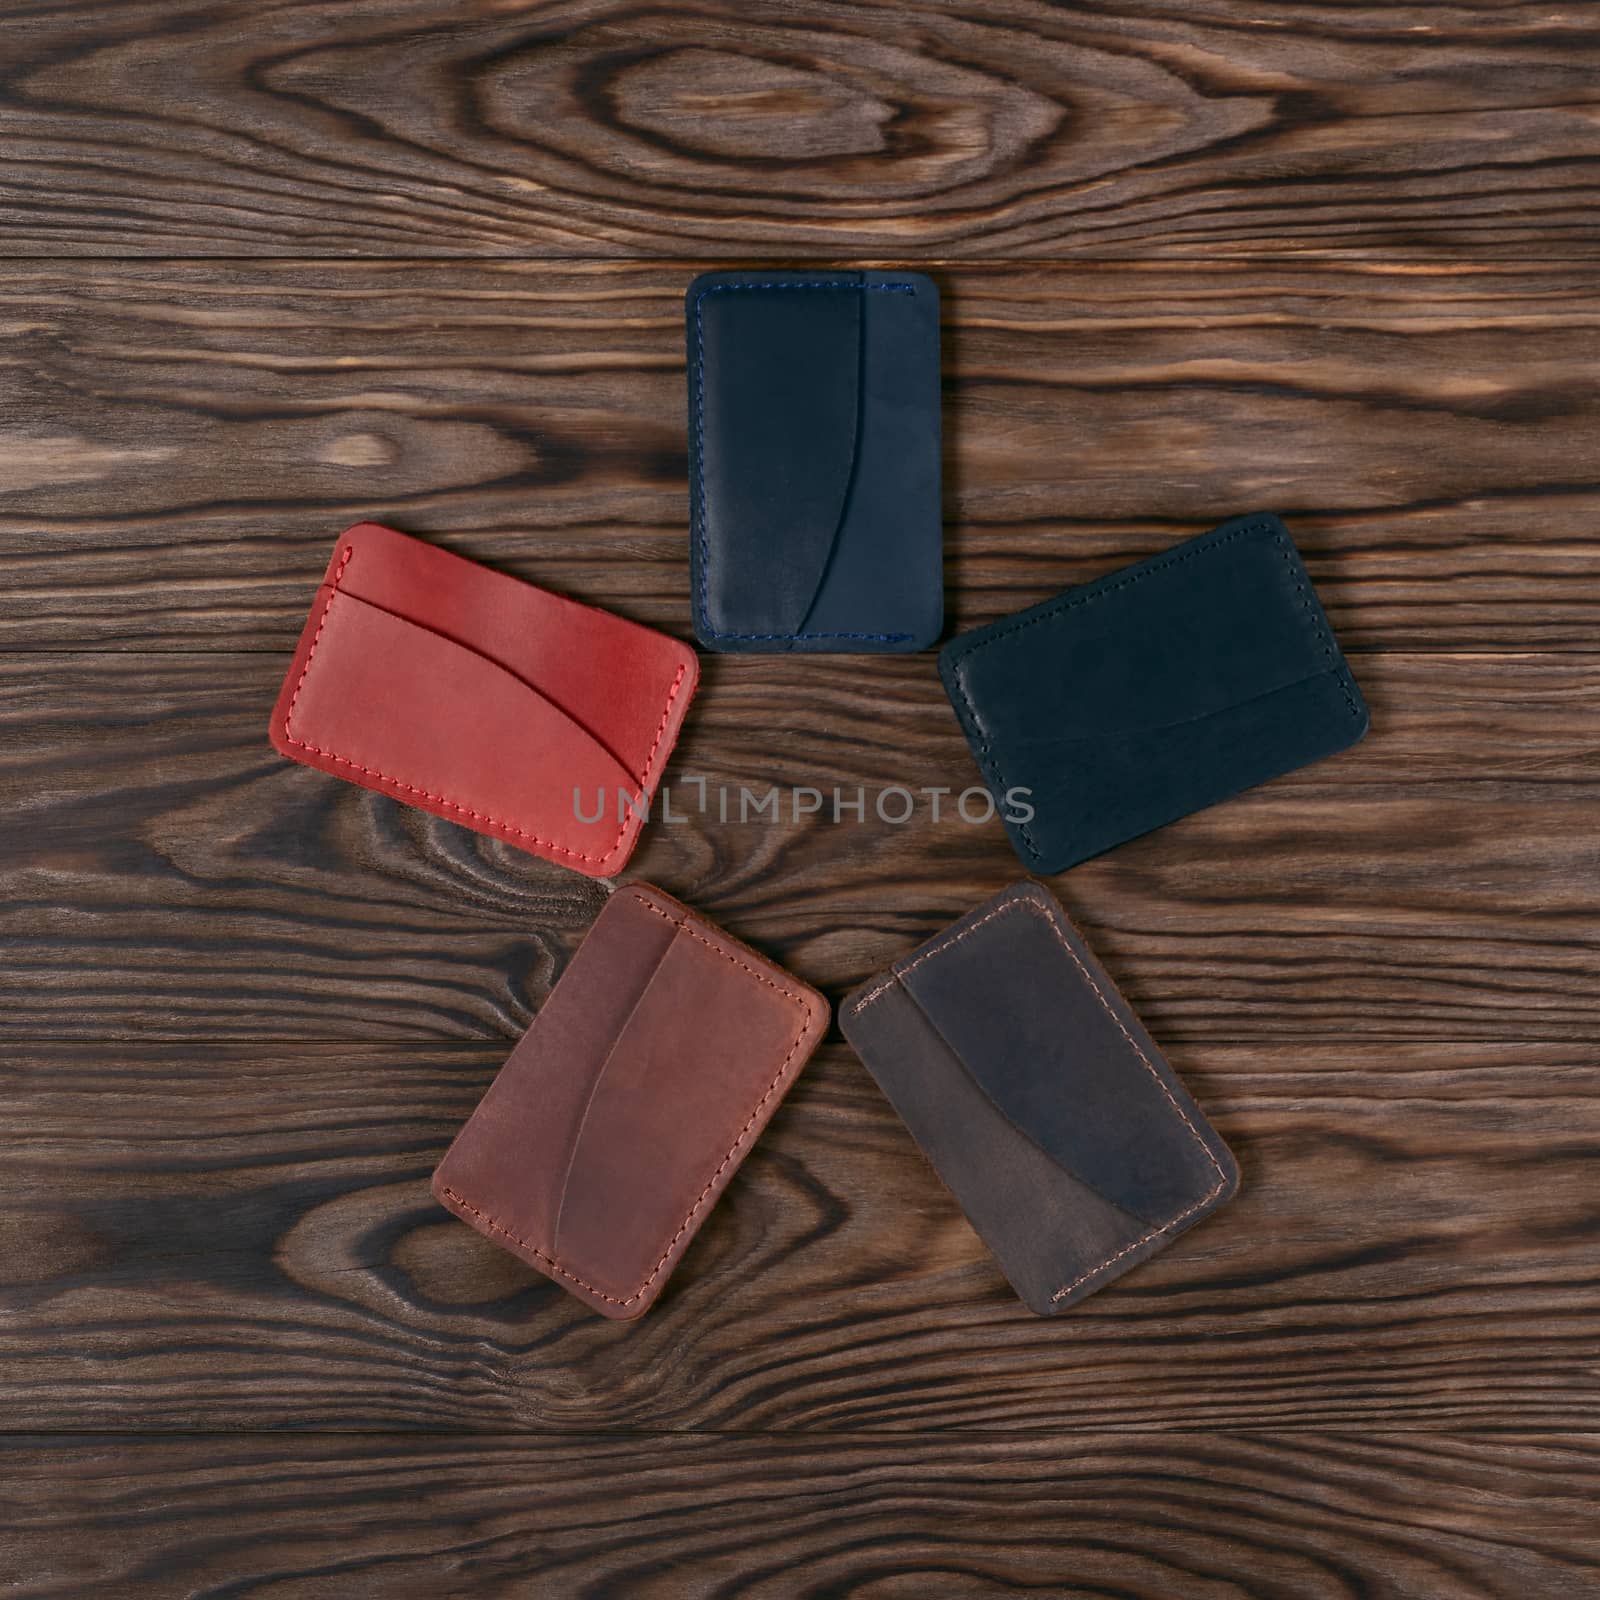 Five handmade leather cardholders on wooden background lies star shaped. Stock photo on perfect wooden background. Blue, black, brown, ginger and red items on photo. by alexsdriver